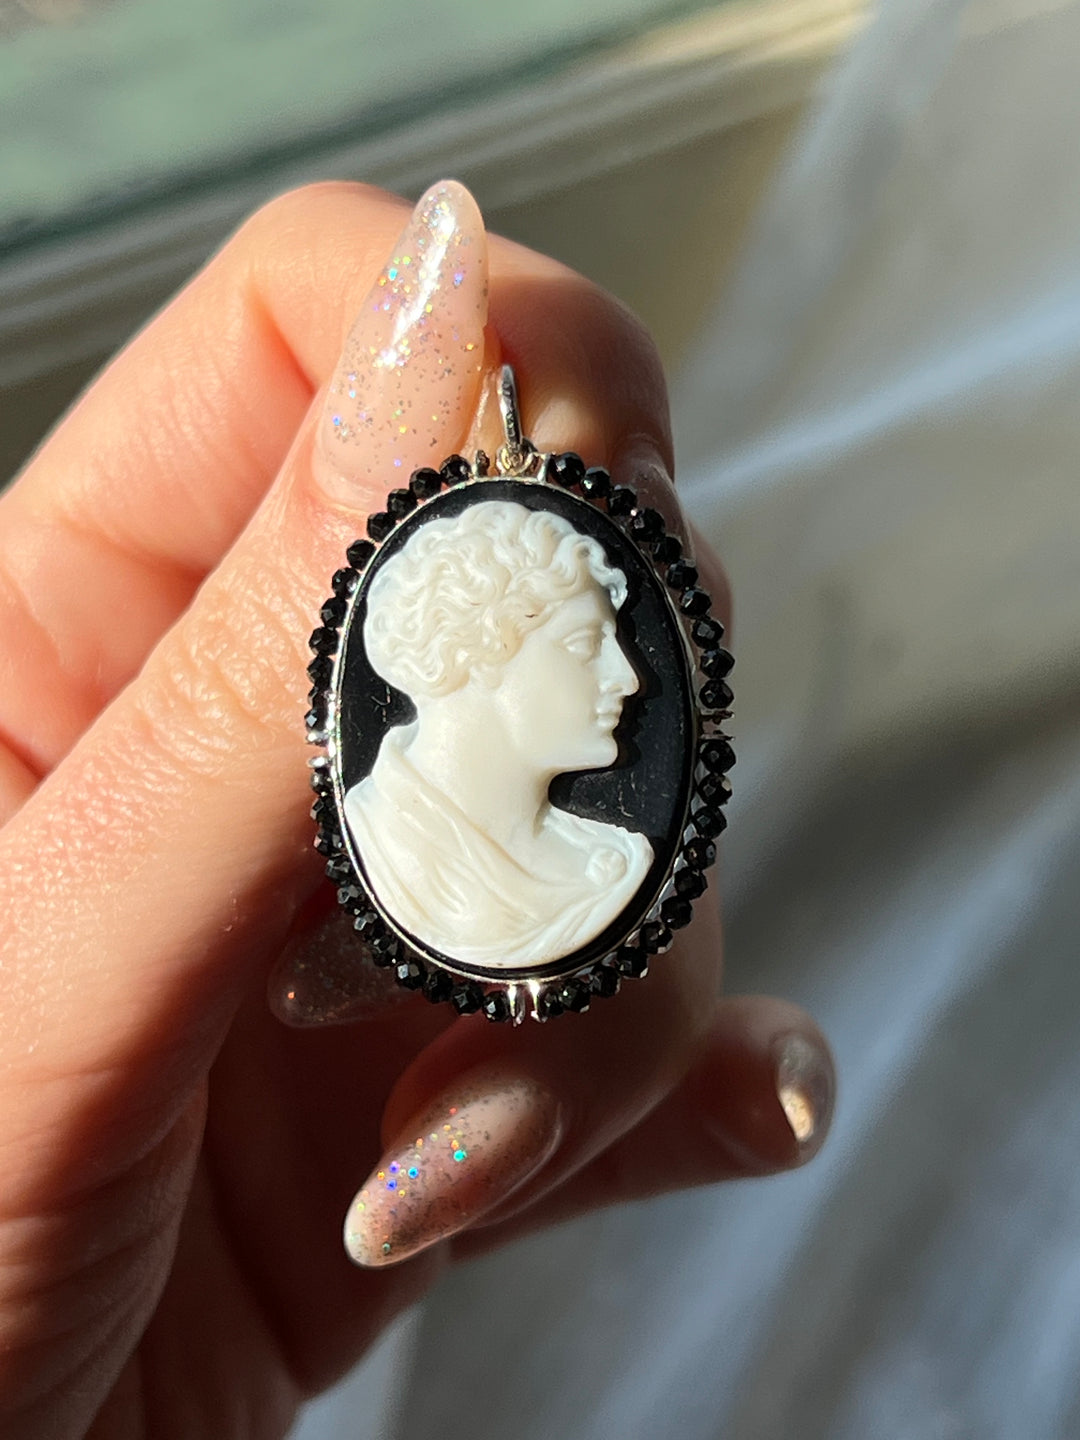 14ct White Gold Onyx Gentleman Cameo Brooch with Black Zircon Halo